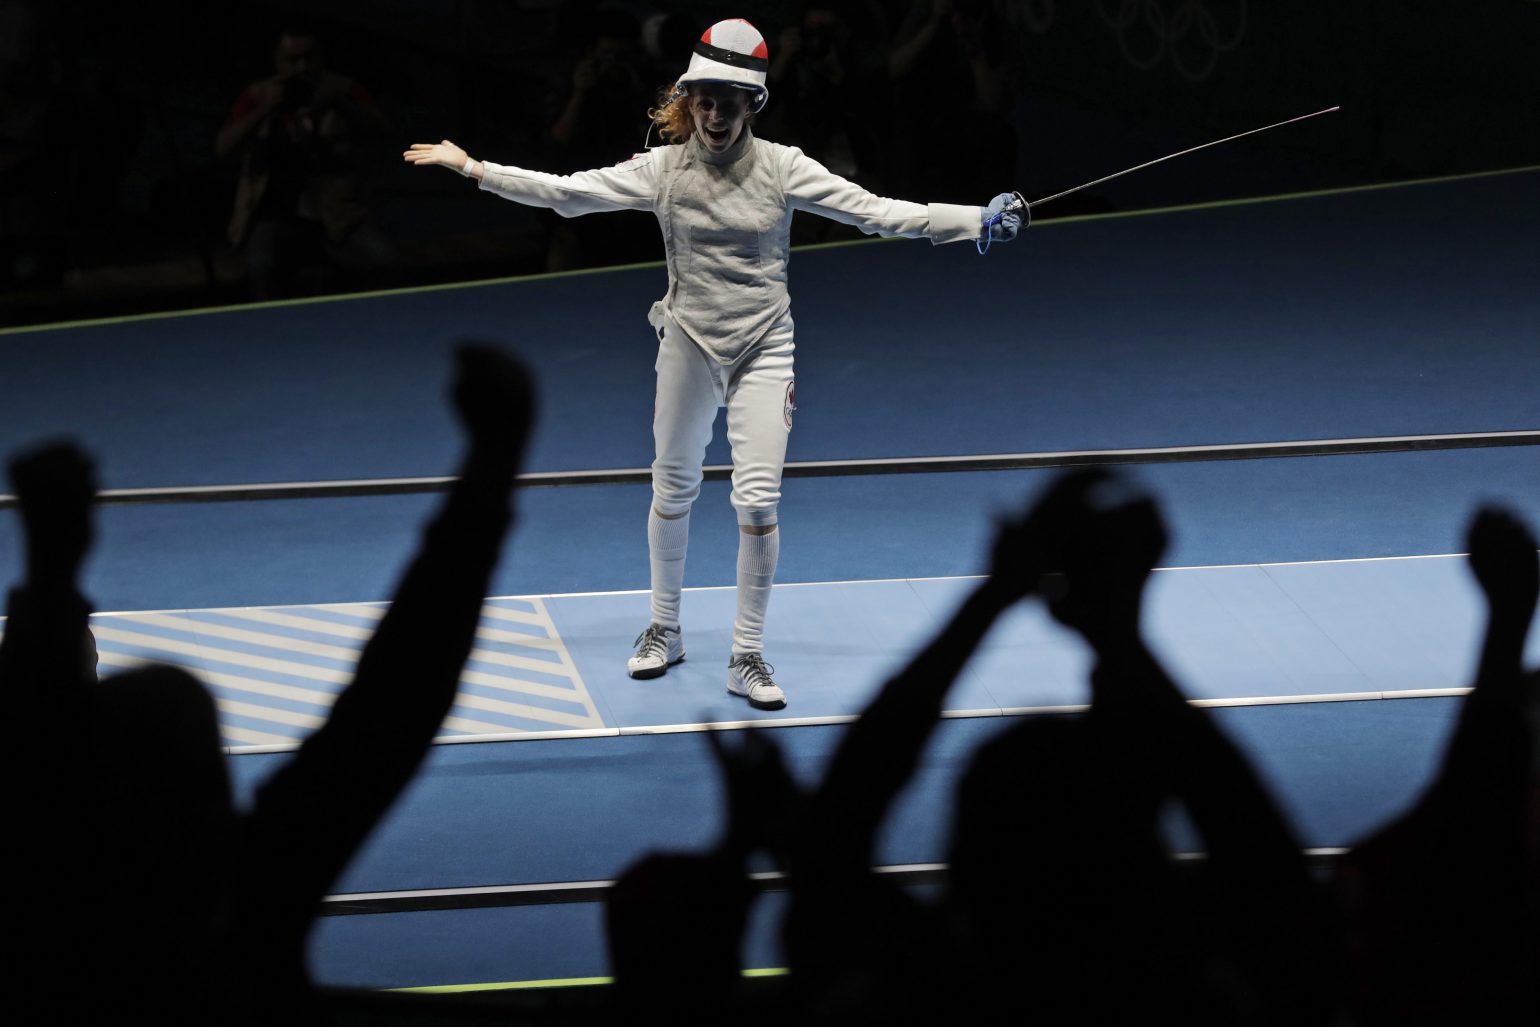 Eleanor Harvey of Canada celebrates after defeating Arianna Errigo of Italy in a women's individual foil event at the 2016 Summer Olympics in Rio de Janeiro, Brazil, Wednesday, Aug. 10, 2016. (AP Photo/Andrew Medichini)